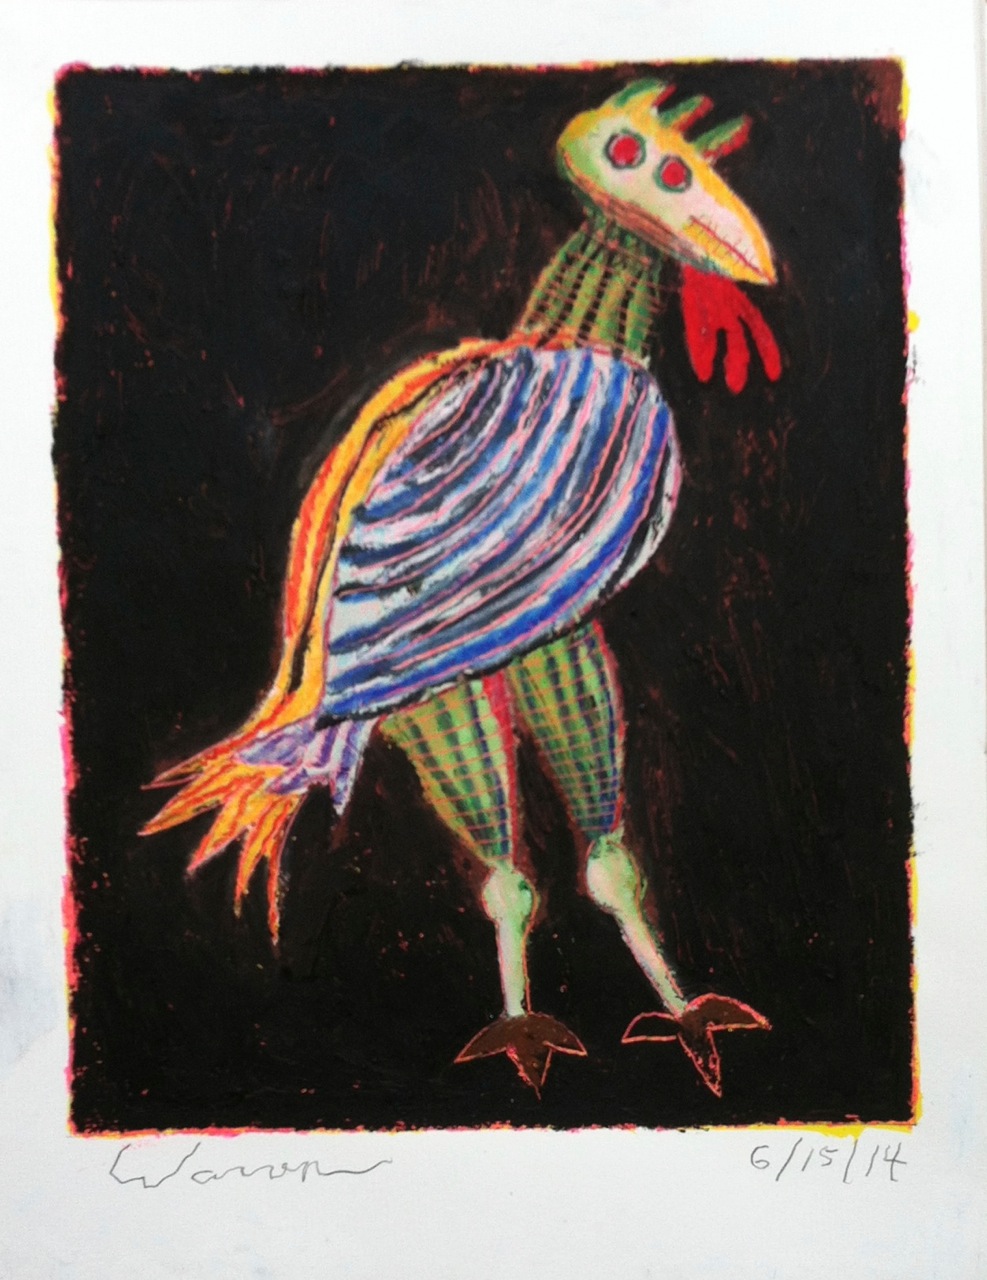 Spanish Rooster by Russ Warren at Les Yeux du Monde Art Gallery